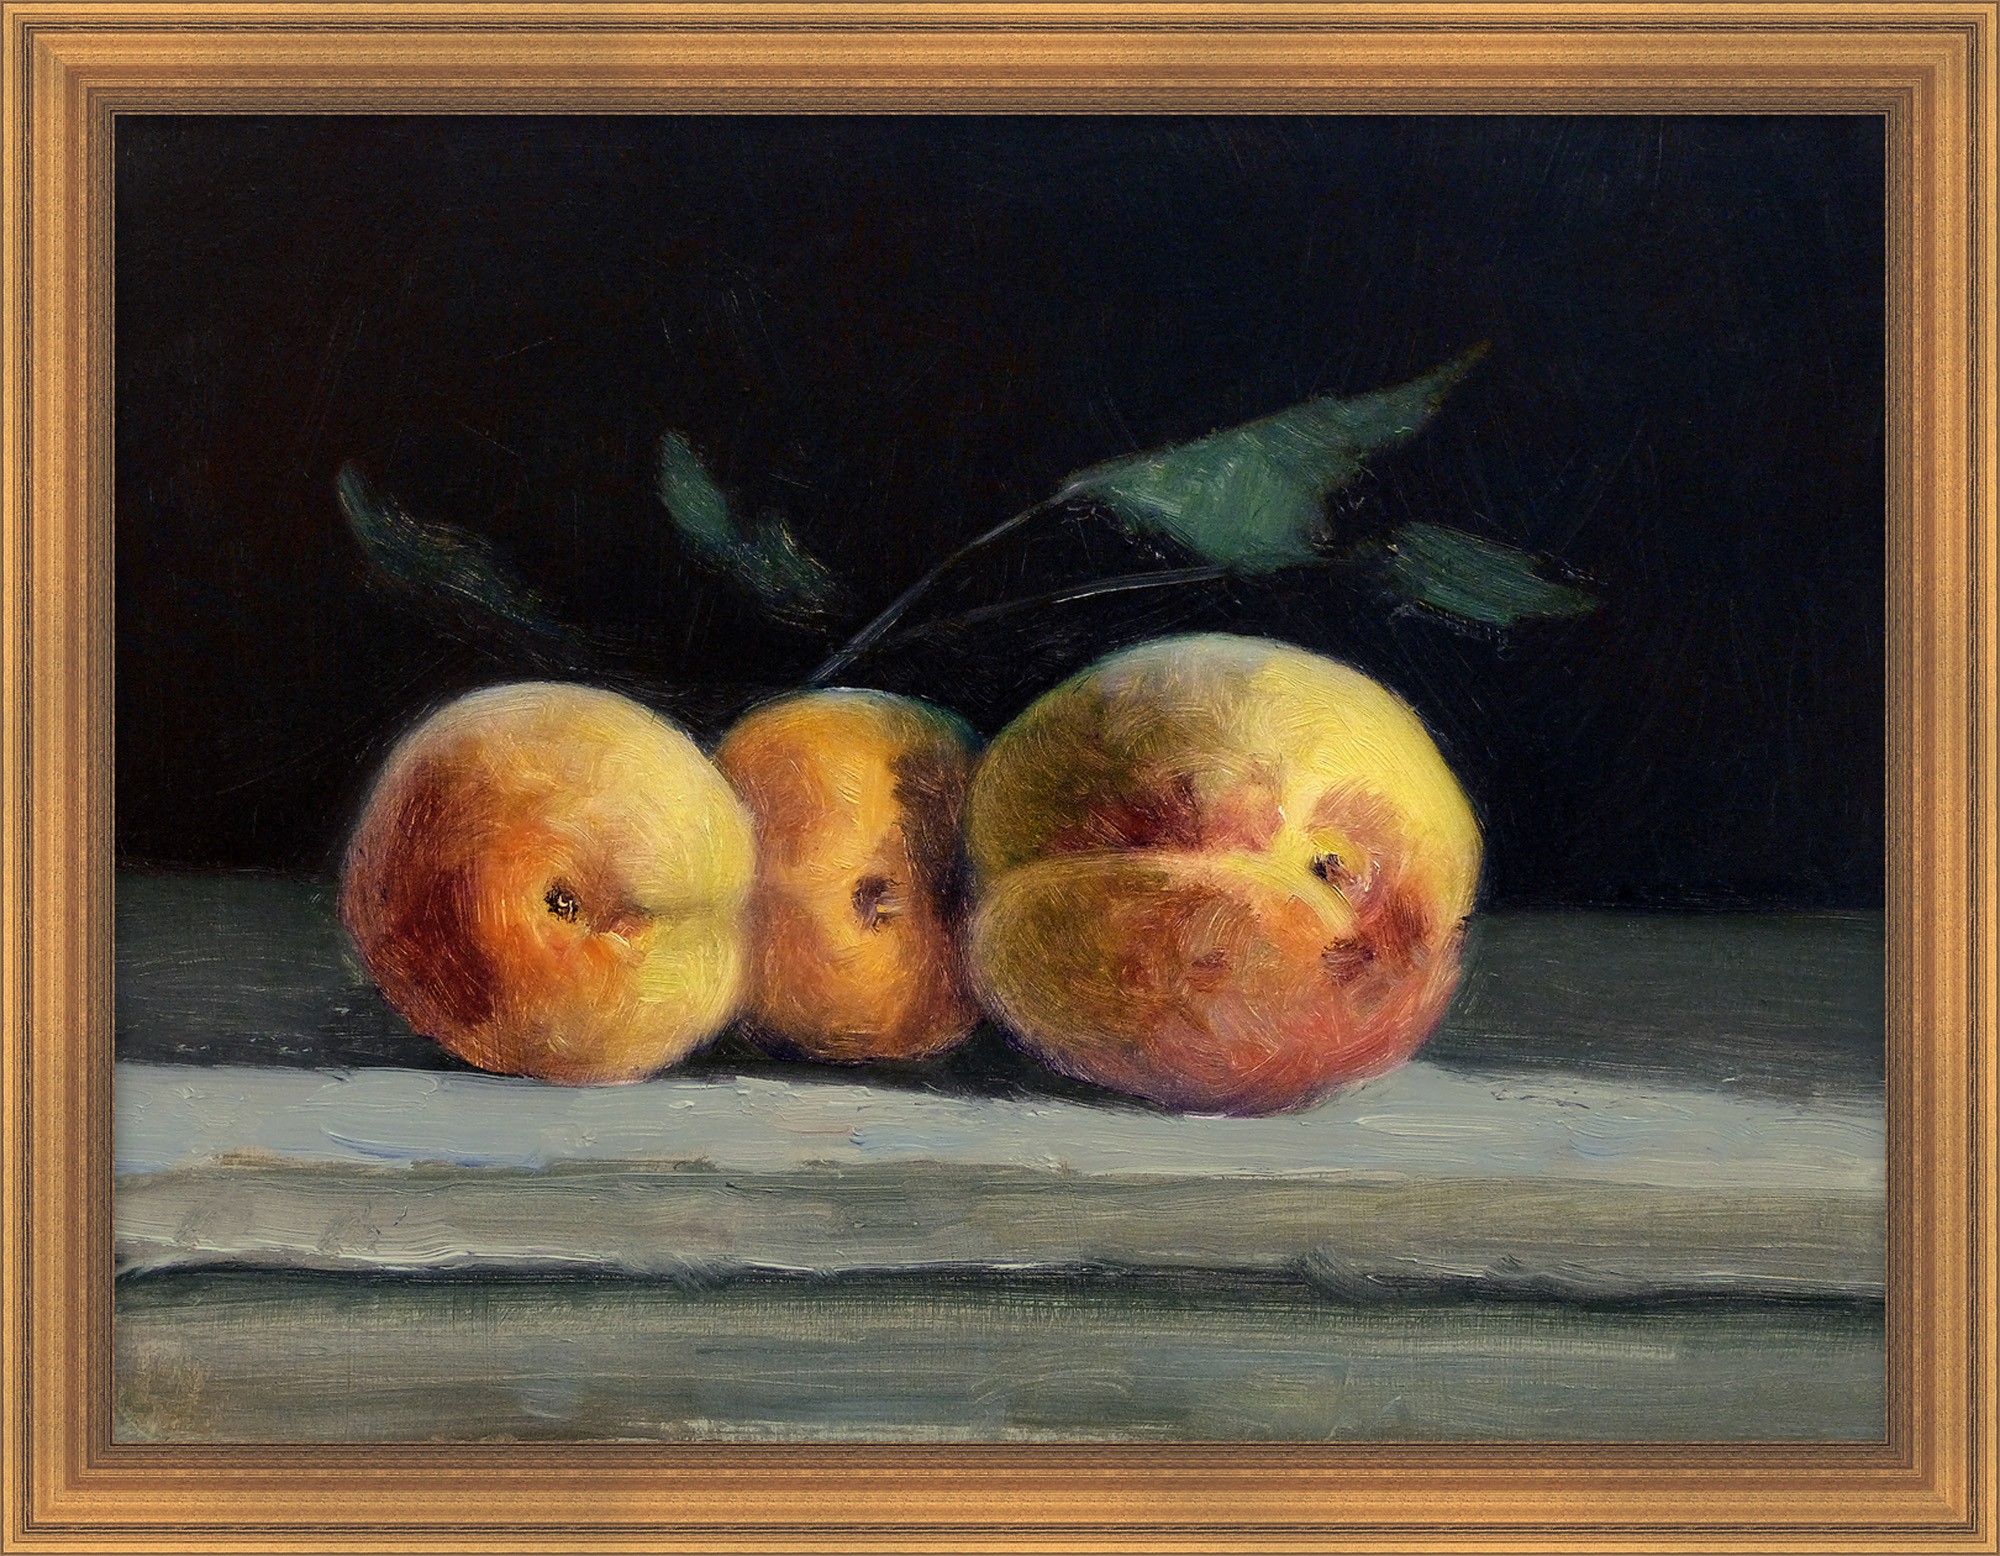 Painting of 3 peaches